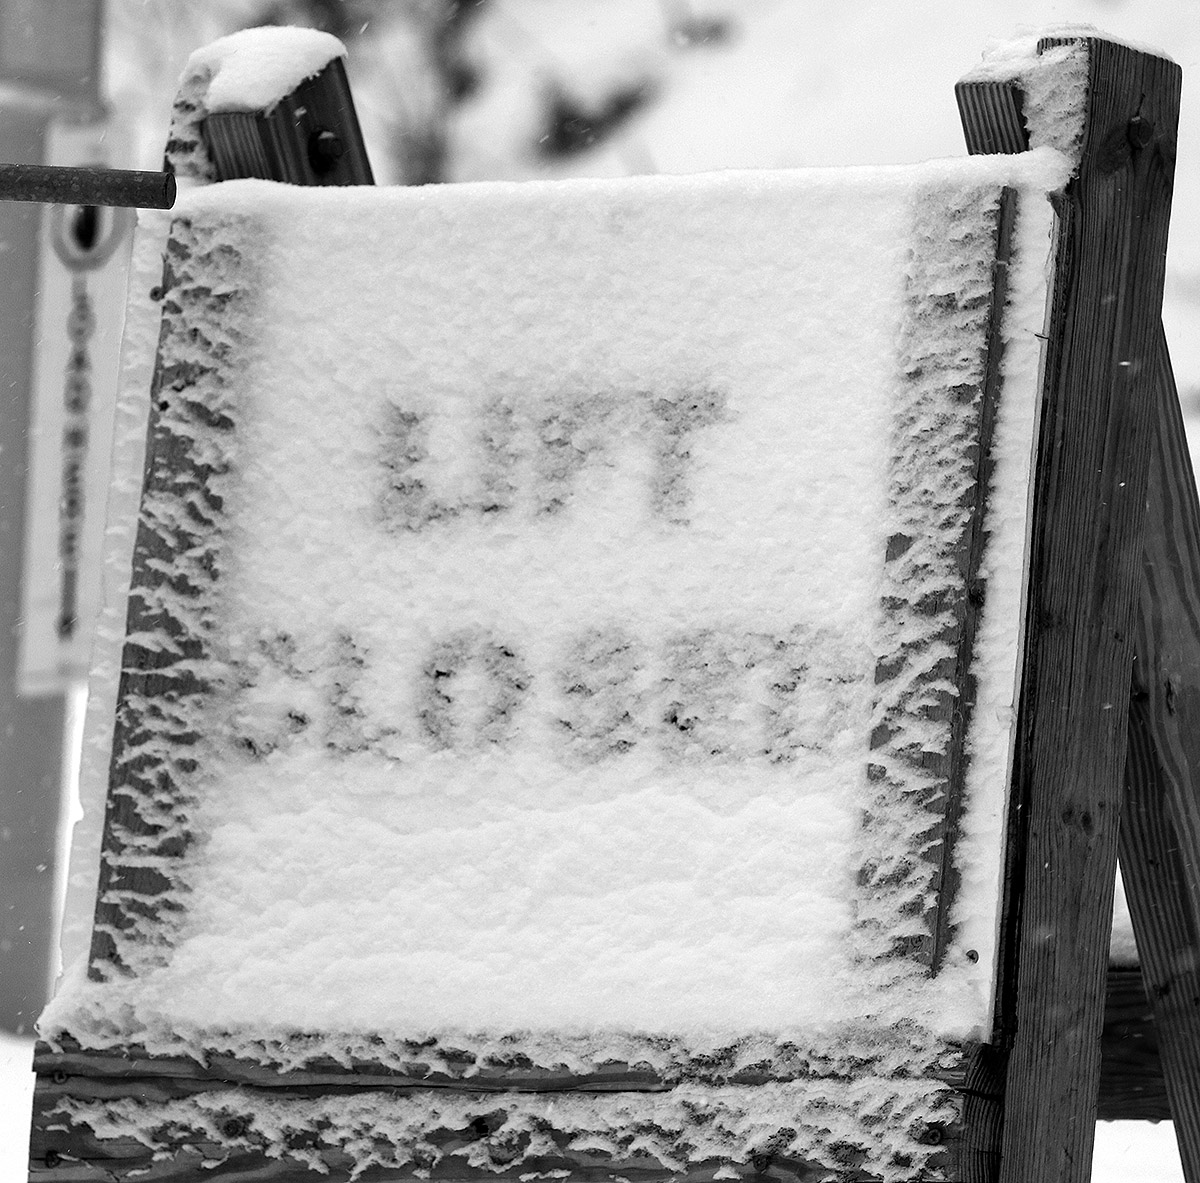 An image of a "Lift Closed" sign coated with a bit of fresh snow in early January at the base of the Wilderness Double Chairlift at Bolton Valley Ski Resort in Vermont